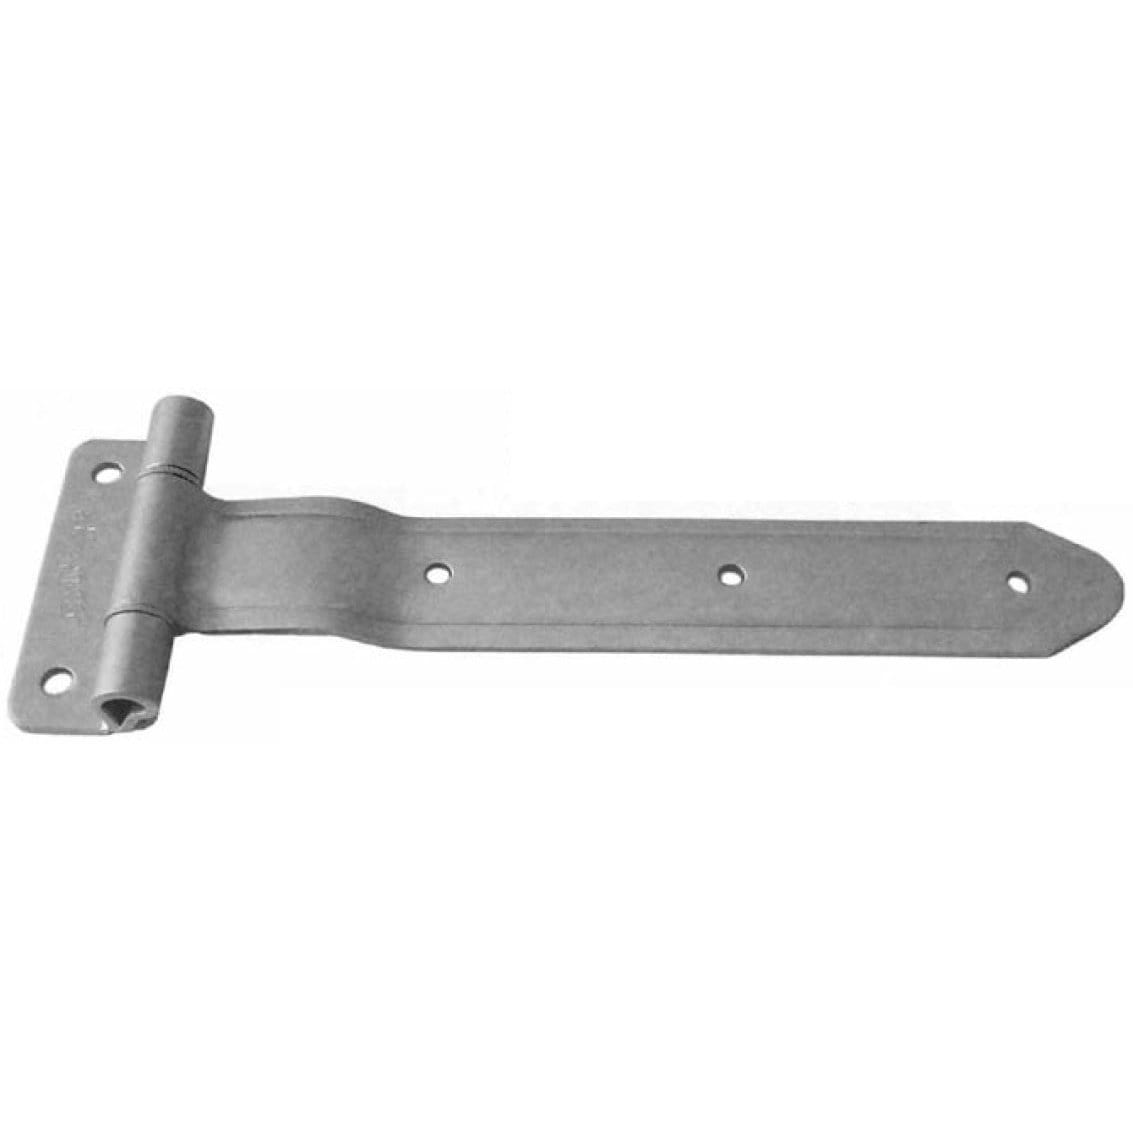 Truck / Trailer Hinges - Embossed Stainless Steel - Narrow Bracket Over The Seal Economy Hinges - Multiple Sizes - Sold Individually